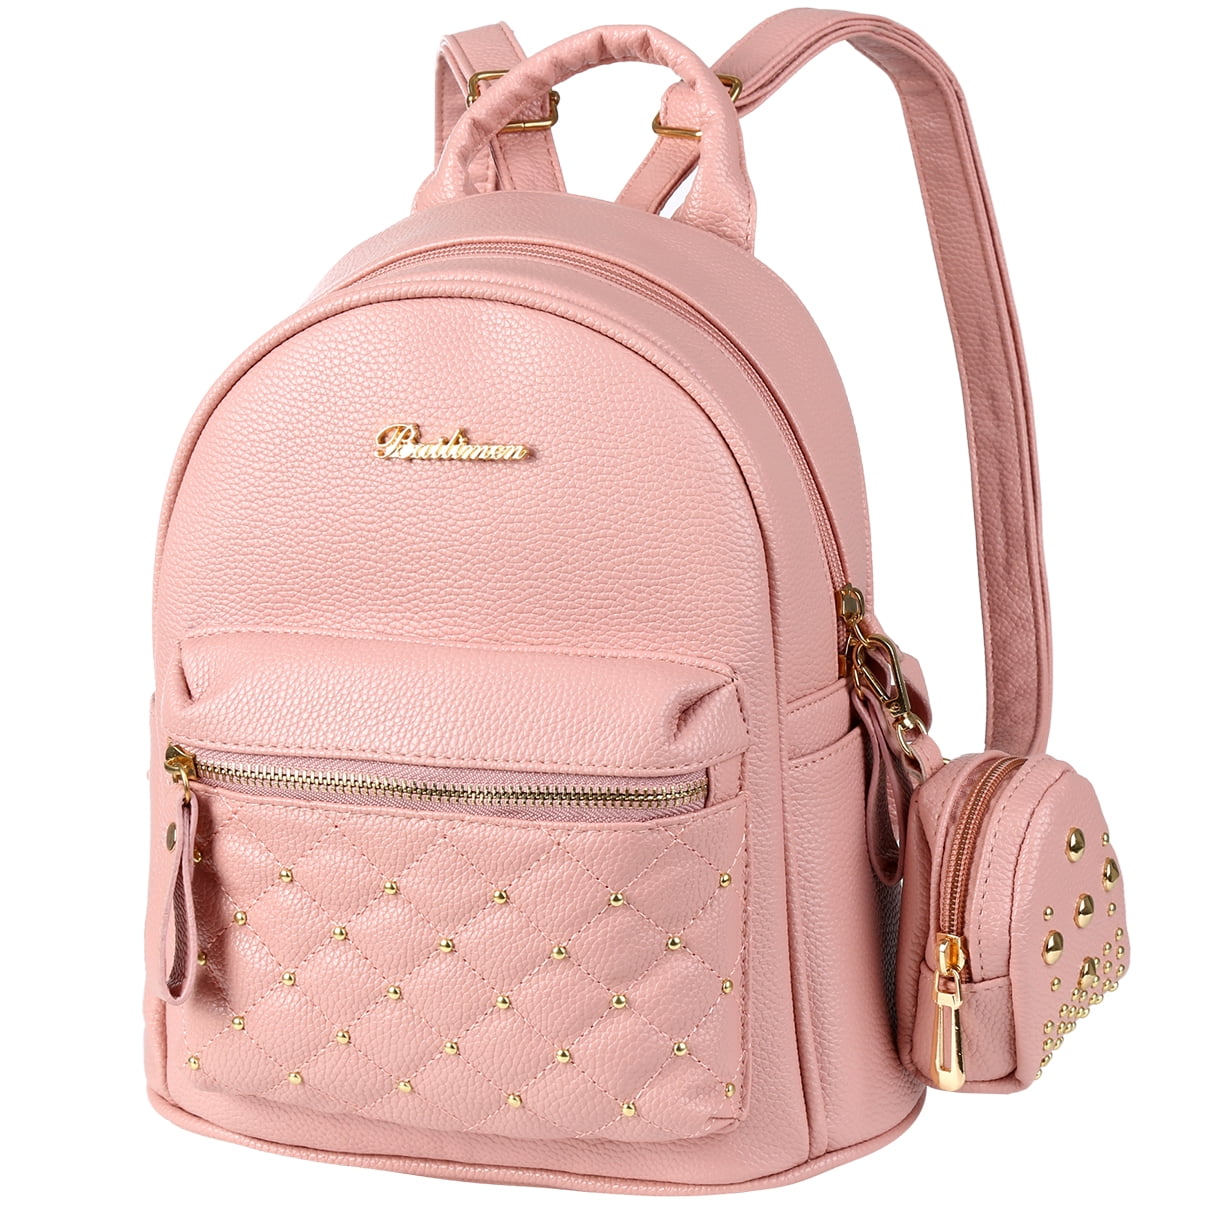 Leather Cute Pink Pig Backpack Daypack Bag Women 